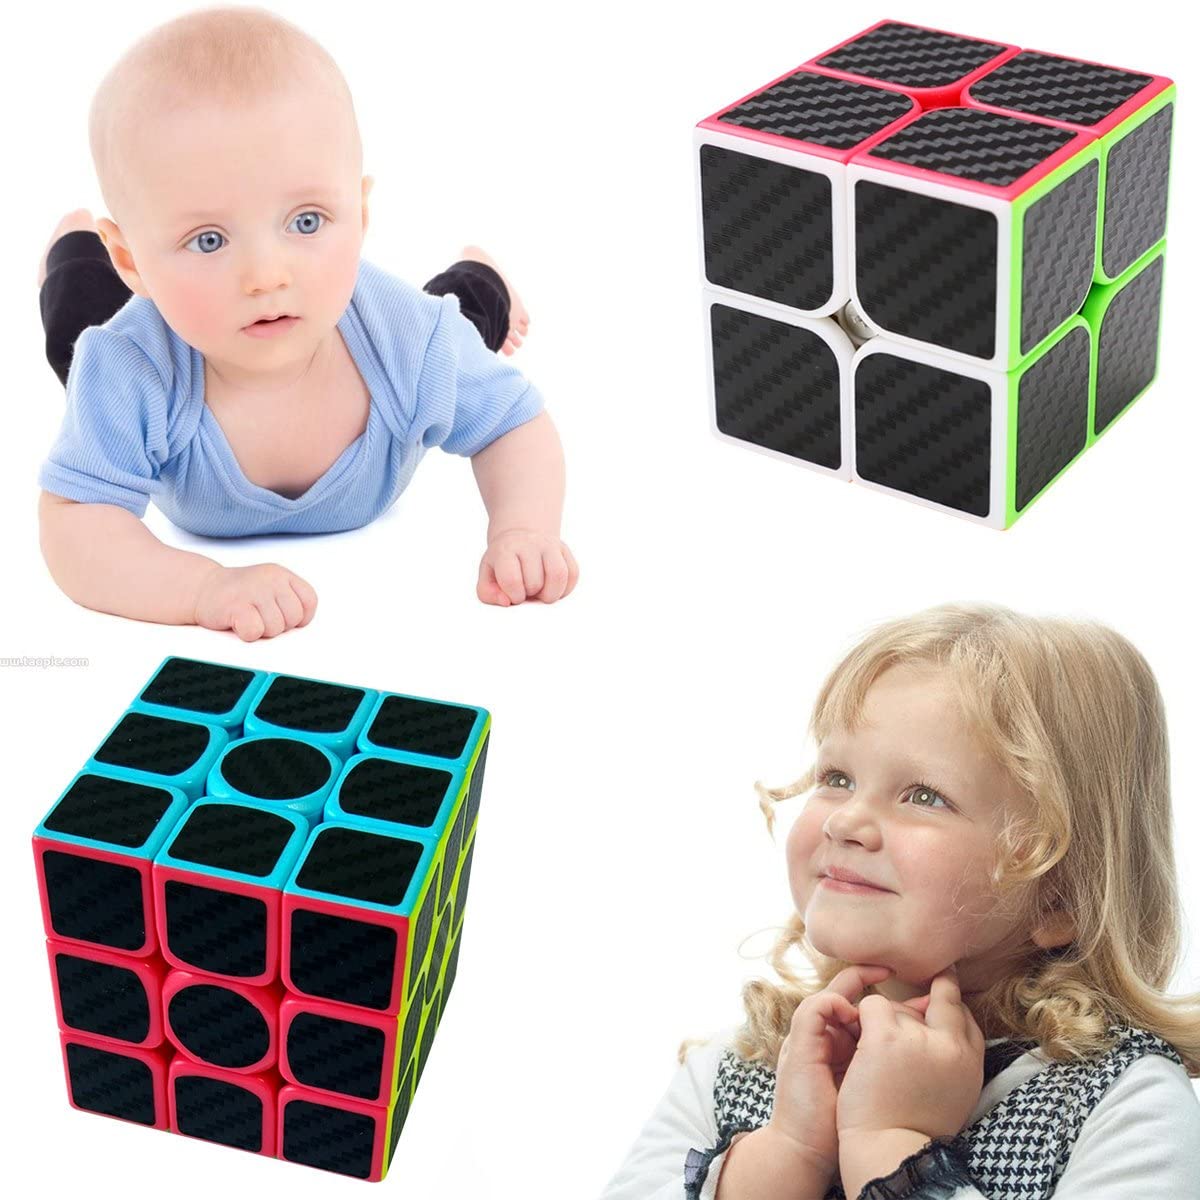 for android instal Magic Cube Puzzle 3D